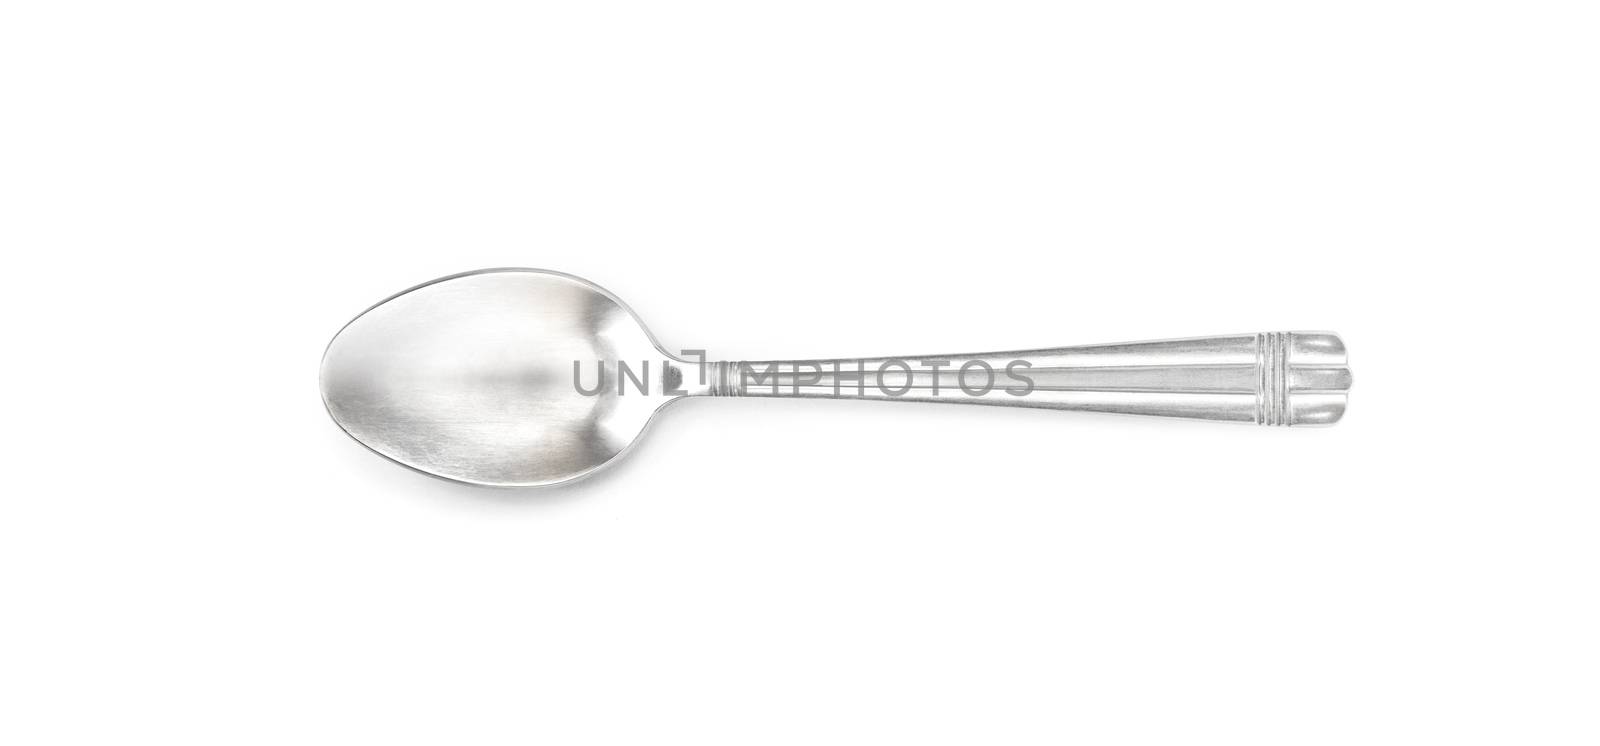 Old silver spoon isolated on white background by SlayCer